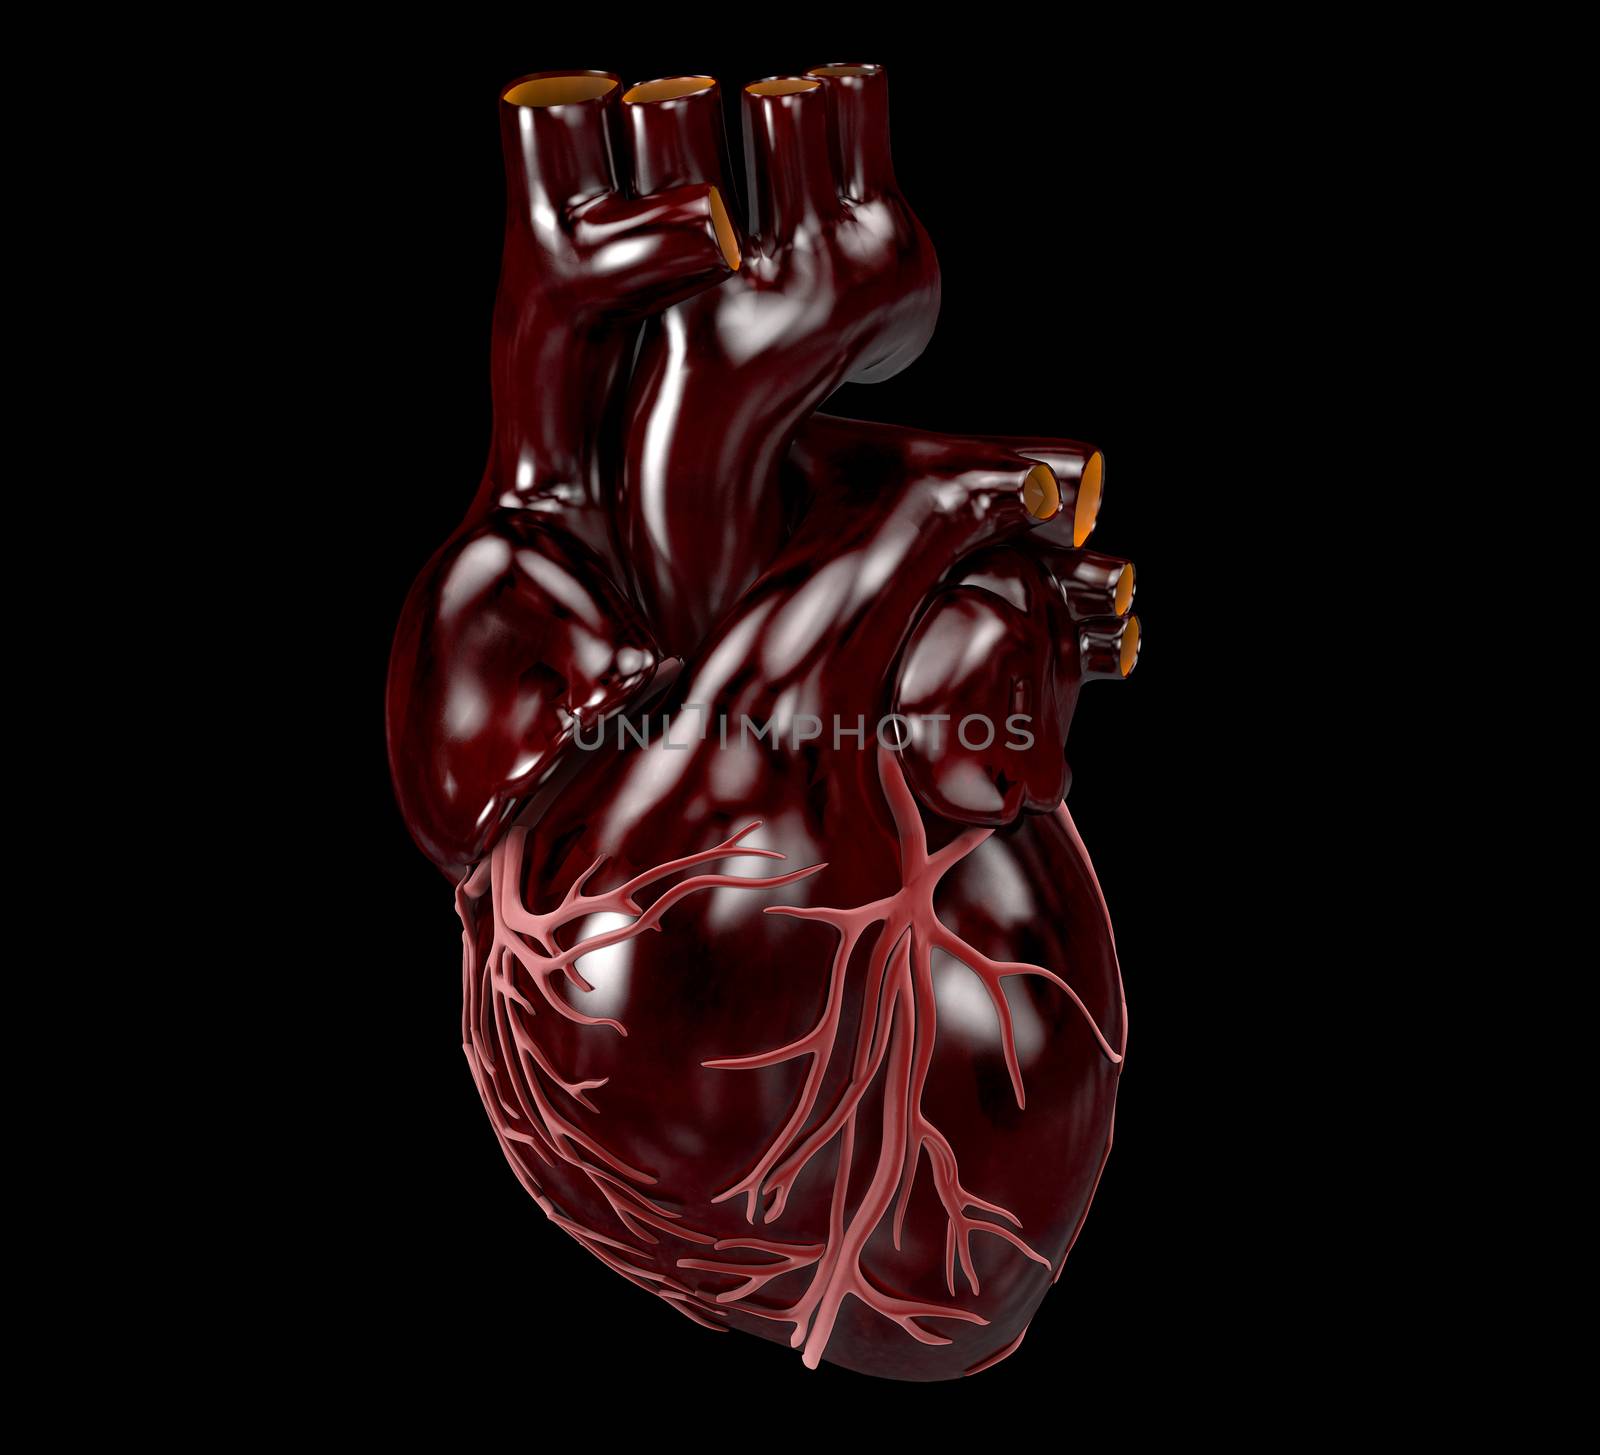 Human Heart - Anatomy of Human Heart 3d Illustration by tussik